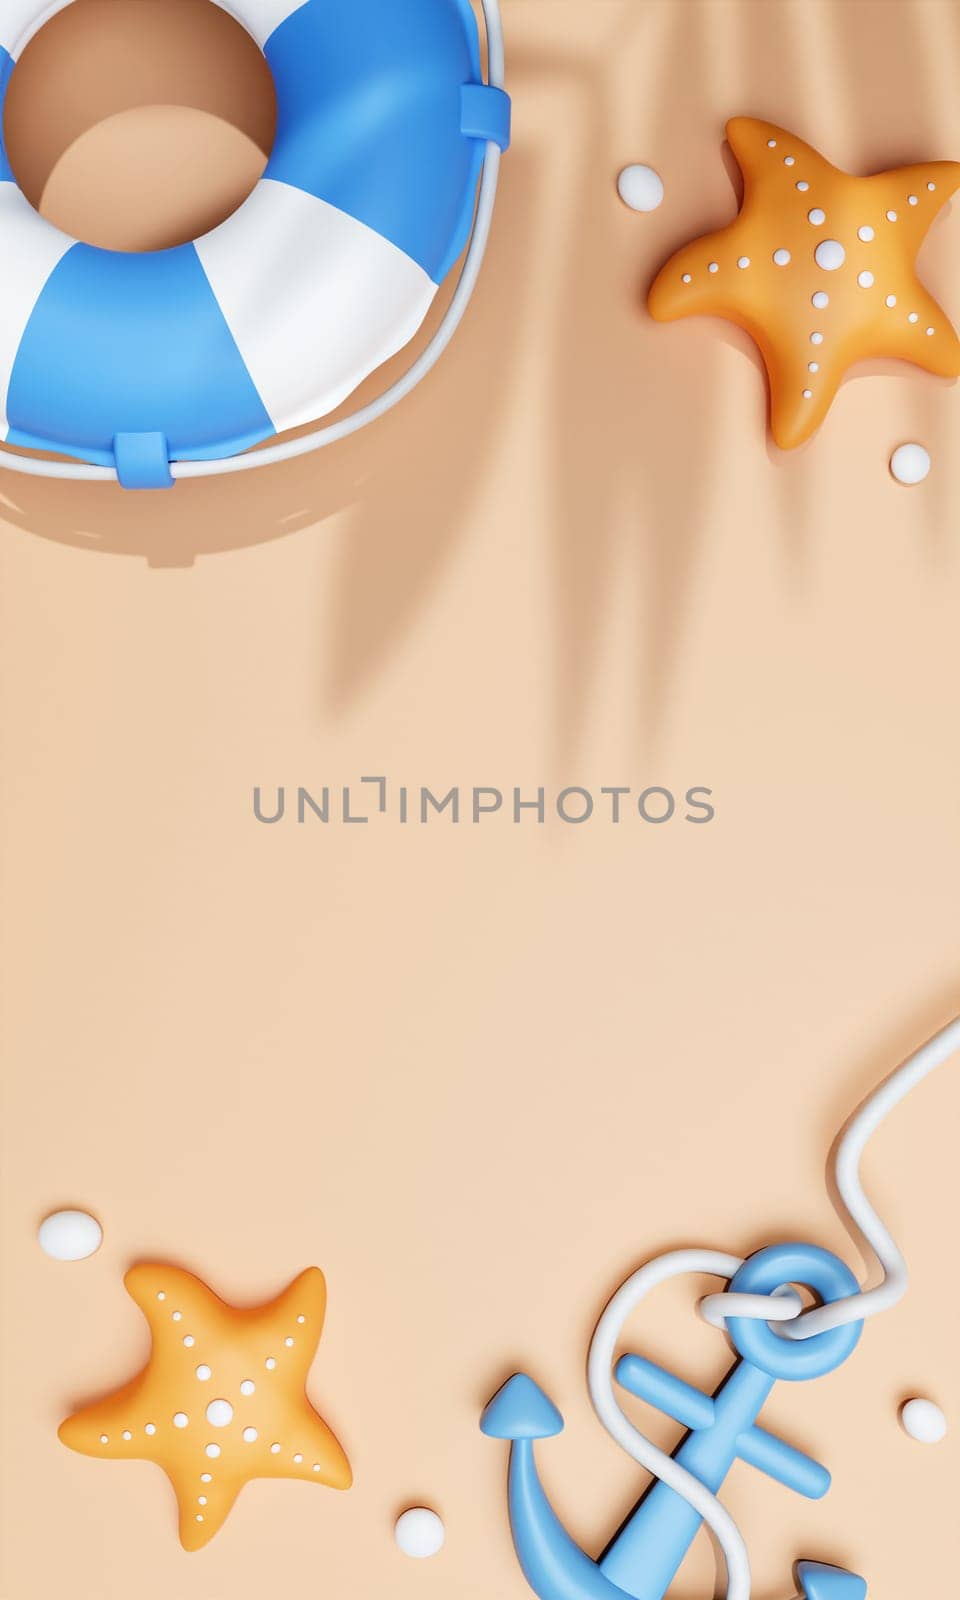 Inflatable ring, starfish and anchor on beach sand. summer vacation concept. Creative travel concept idea with copy space. illustration banner 3d rendering illustration.